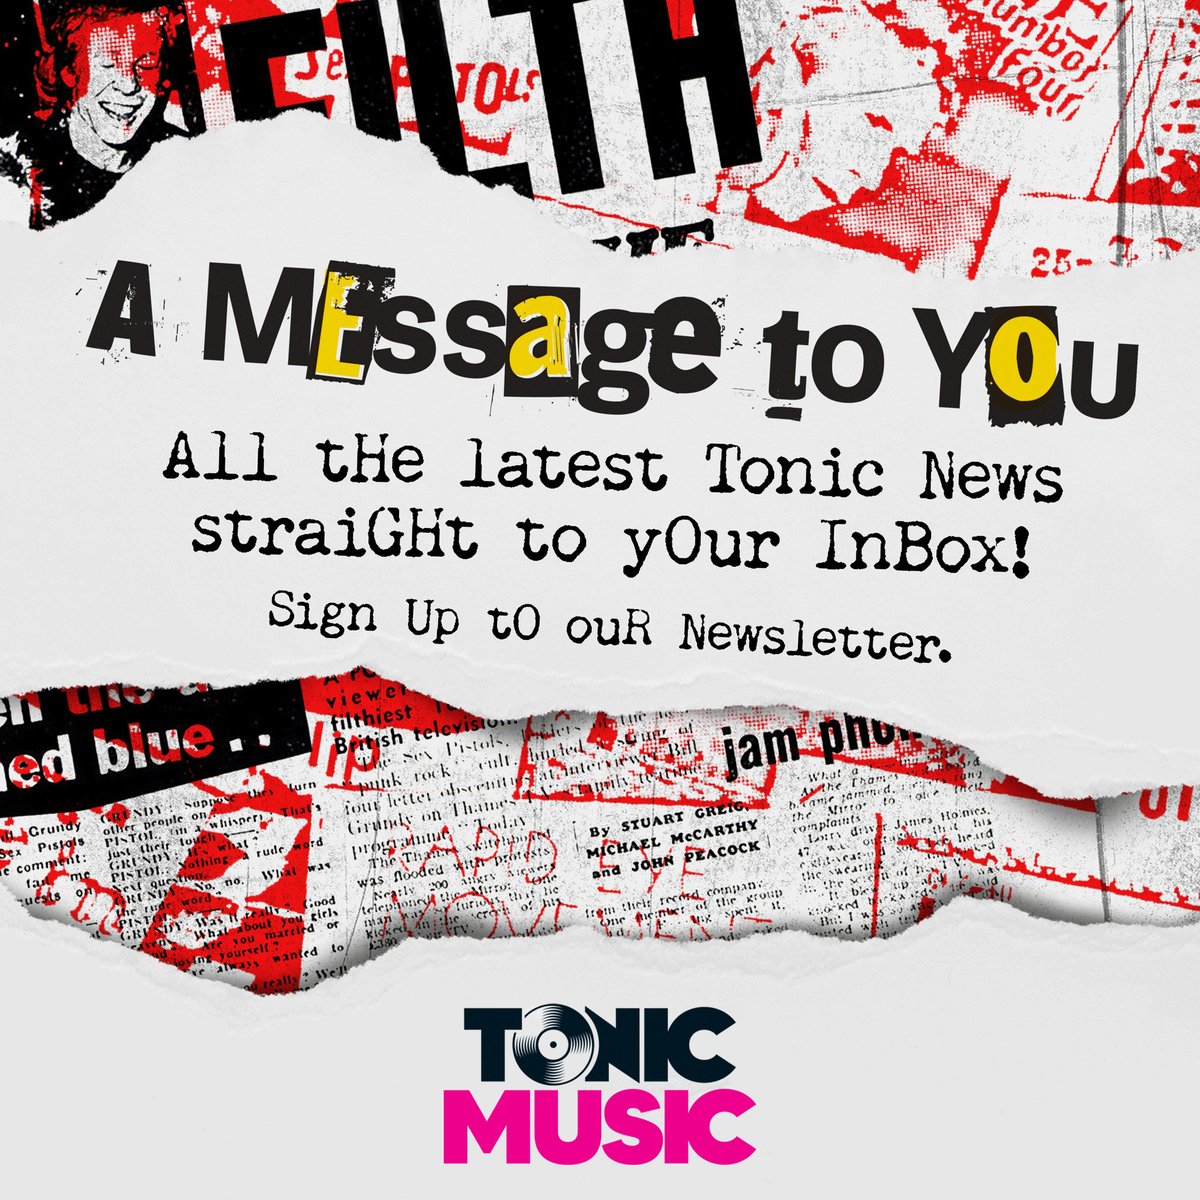 Don't miss out - sign up to keep in the know → tinyurl.com/3cckwp24
#MentalHealth #Music #Tonic #signmeup
#TonicRider #NeverMindTheStigma #Newsletter